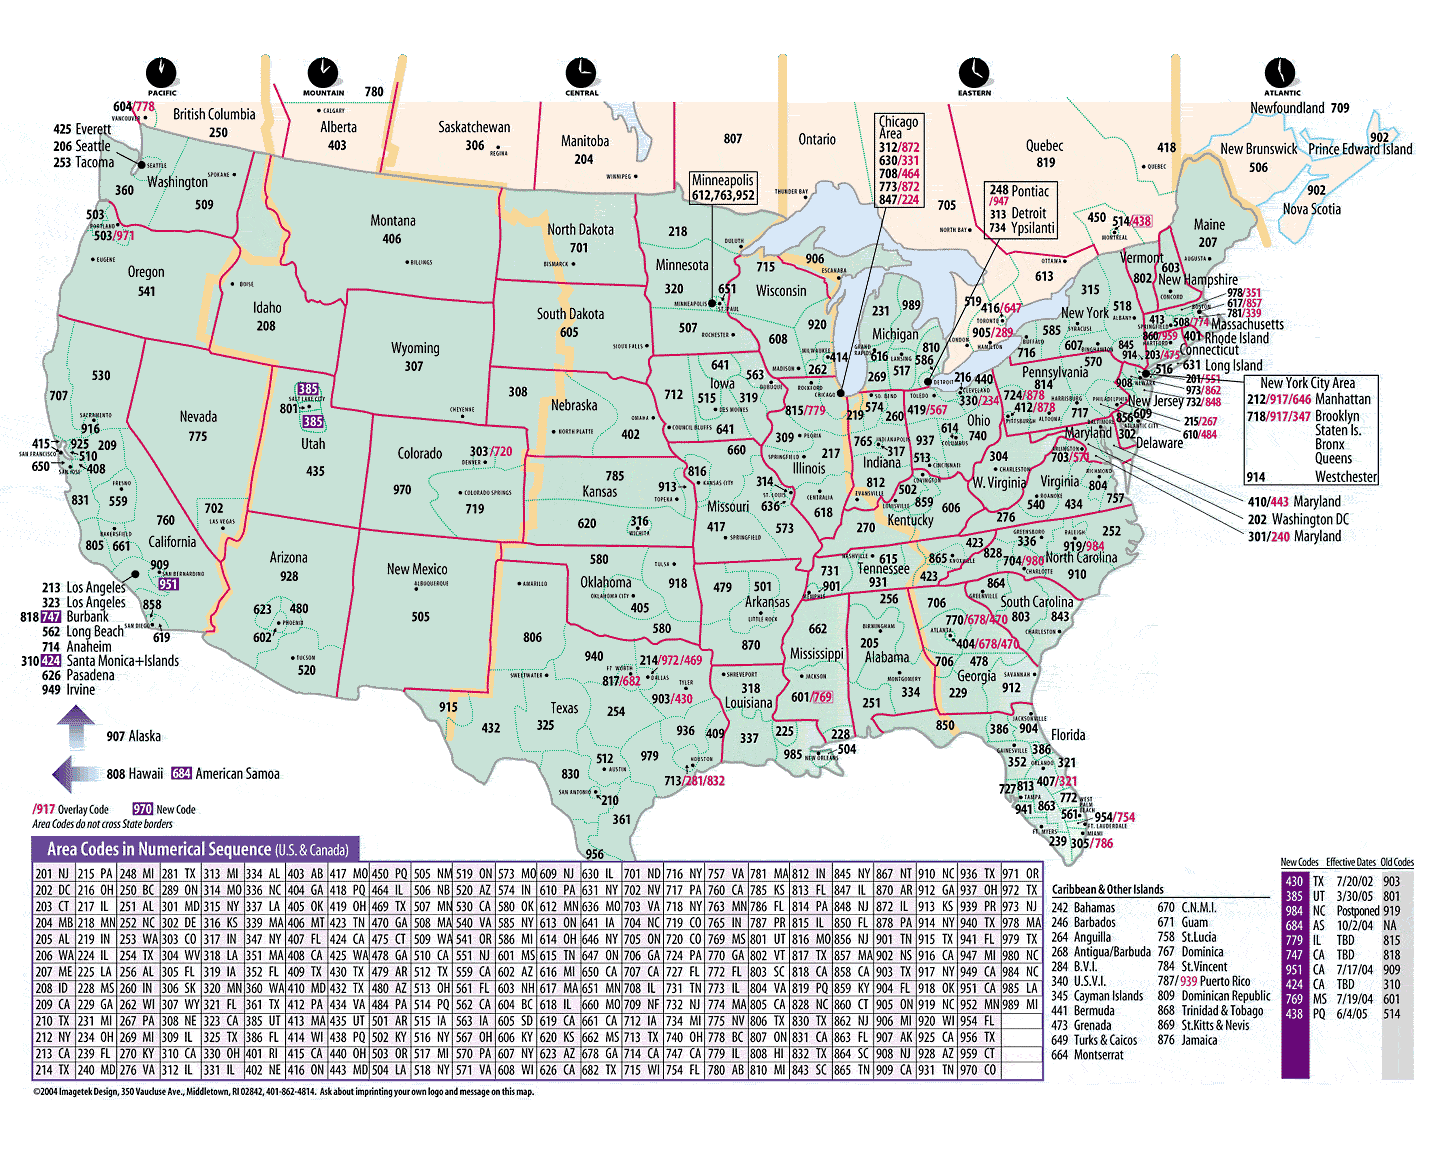 country area codes